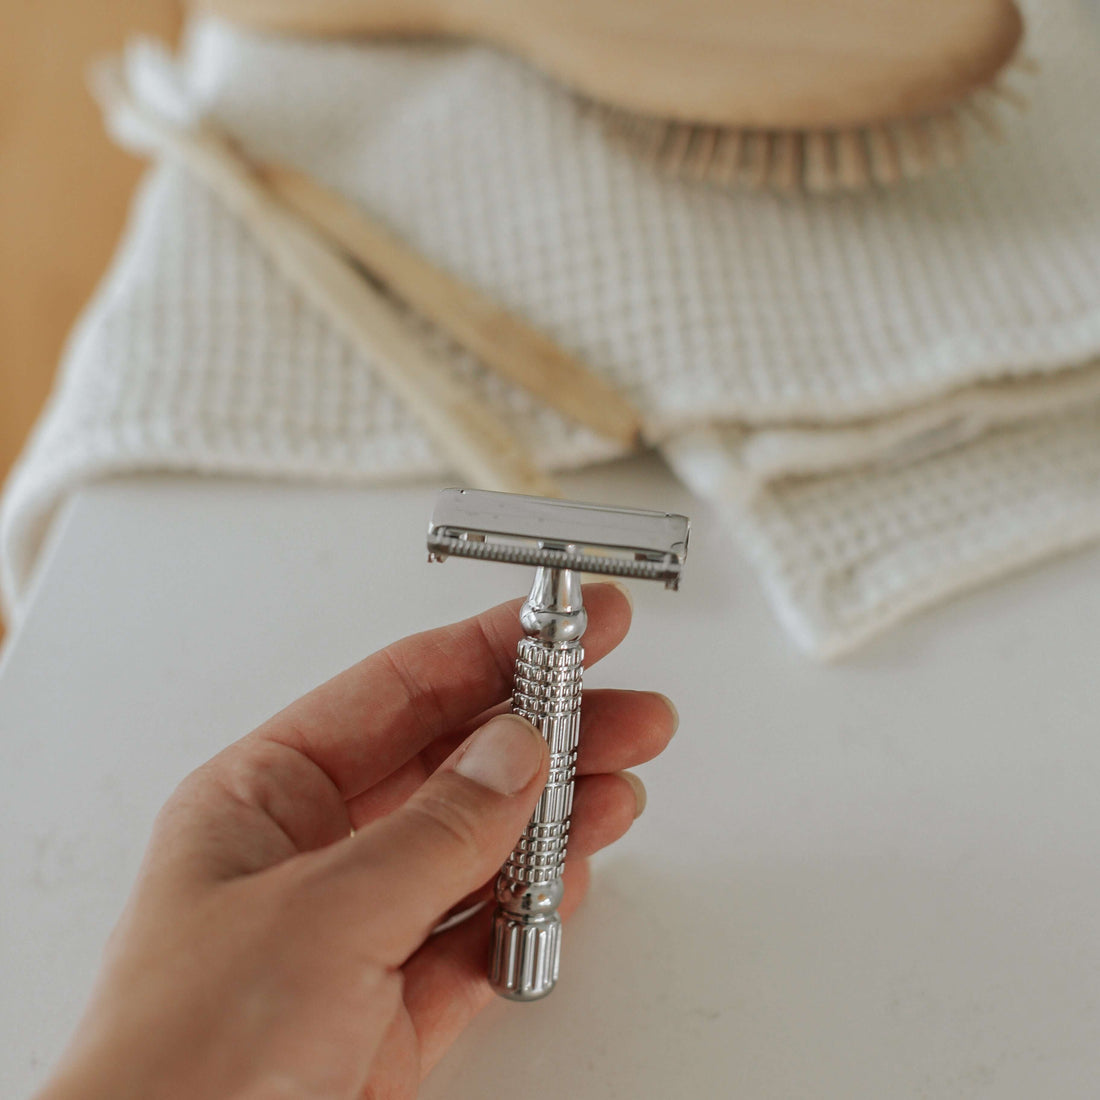 Reusable Safety Razor R1 Butterfly